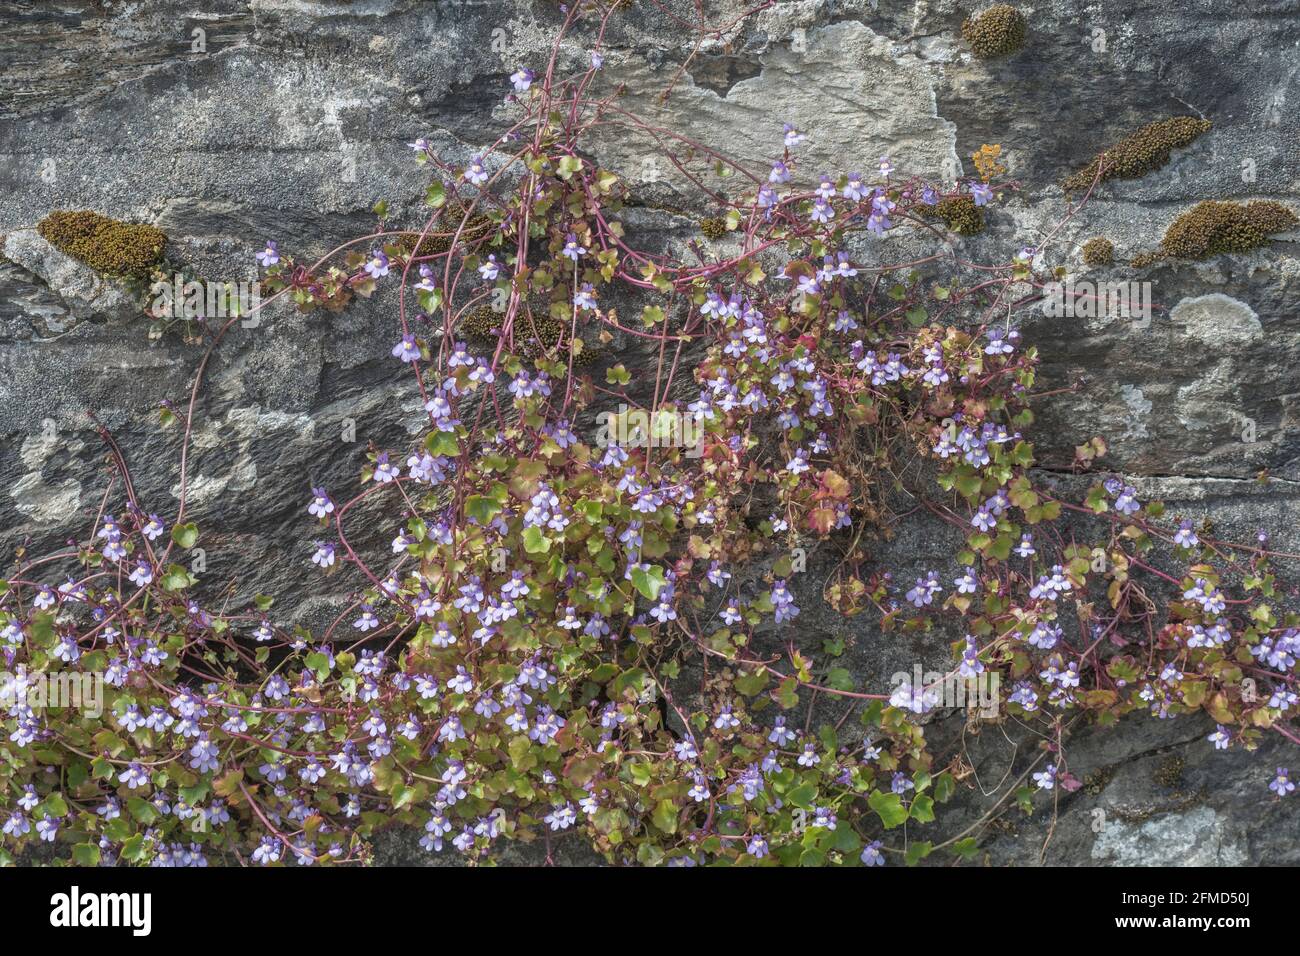 Flowering Ivy-leaved Toadflax / Cymbalaria muralis growing in a stone wall. Once used as a medicinal plant for herbal remedies. Stock Photo